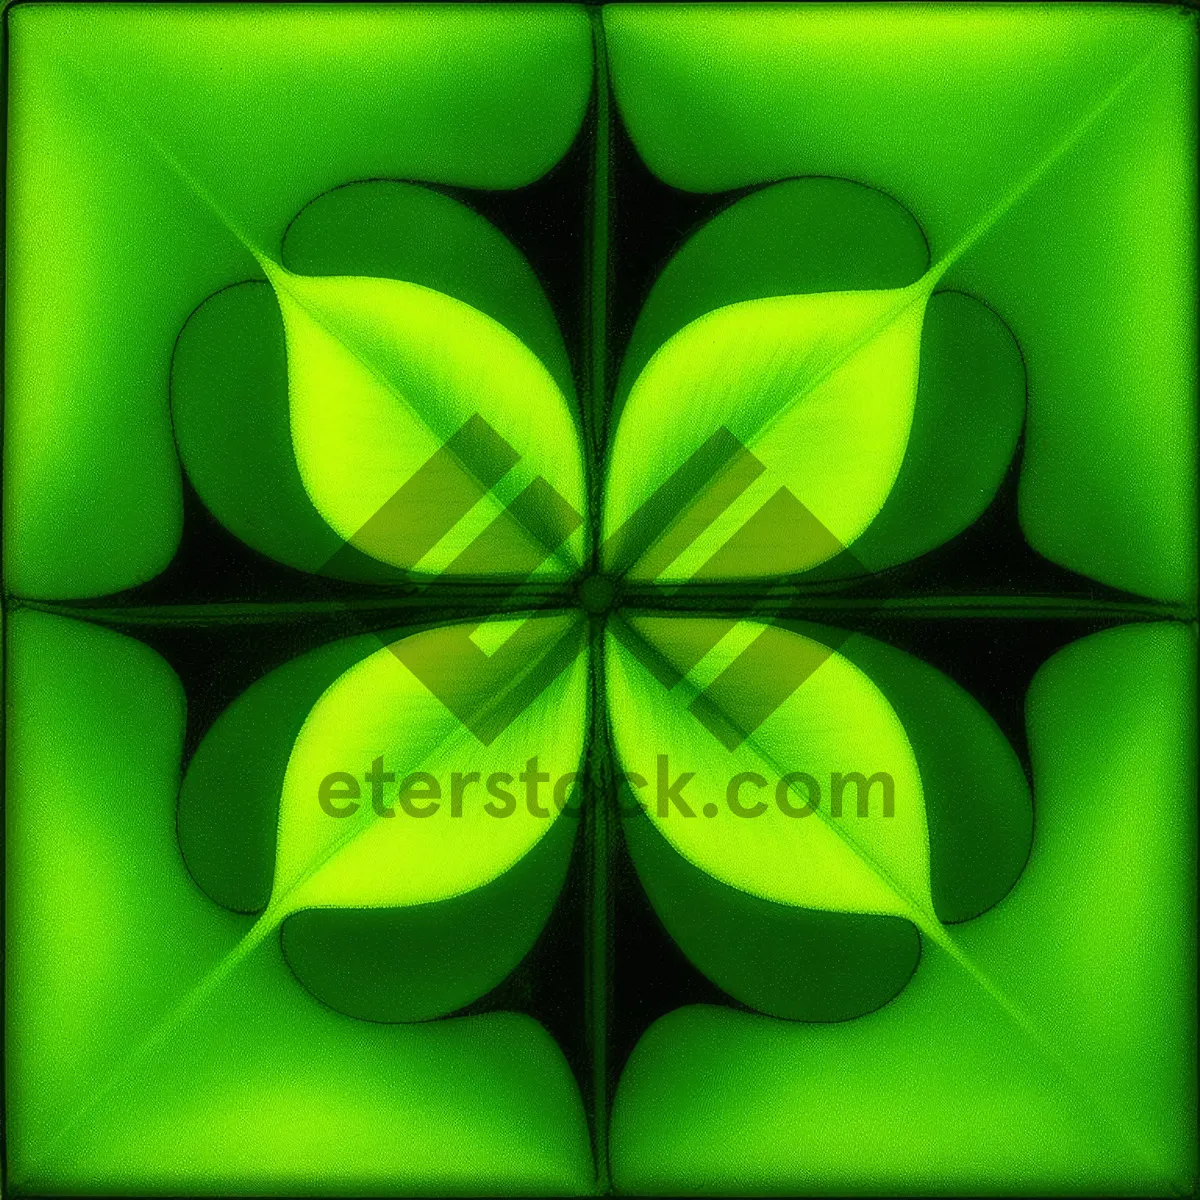 Picture of Colorful Fractal Art Wallpaper with Modern Design